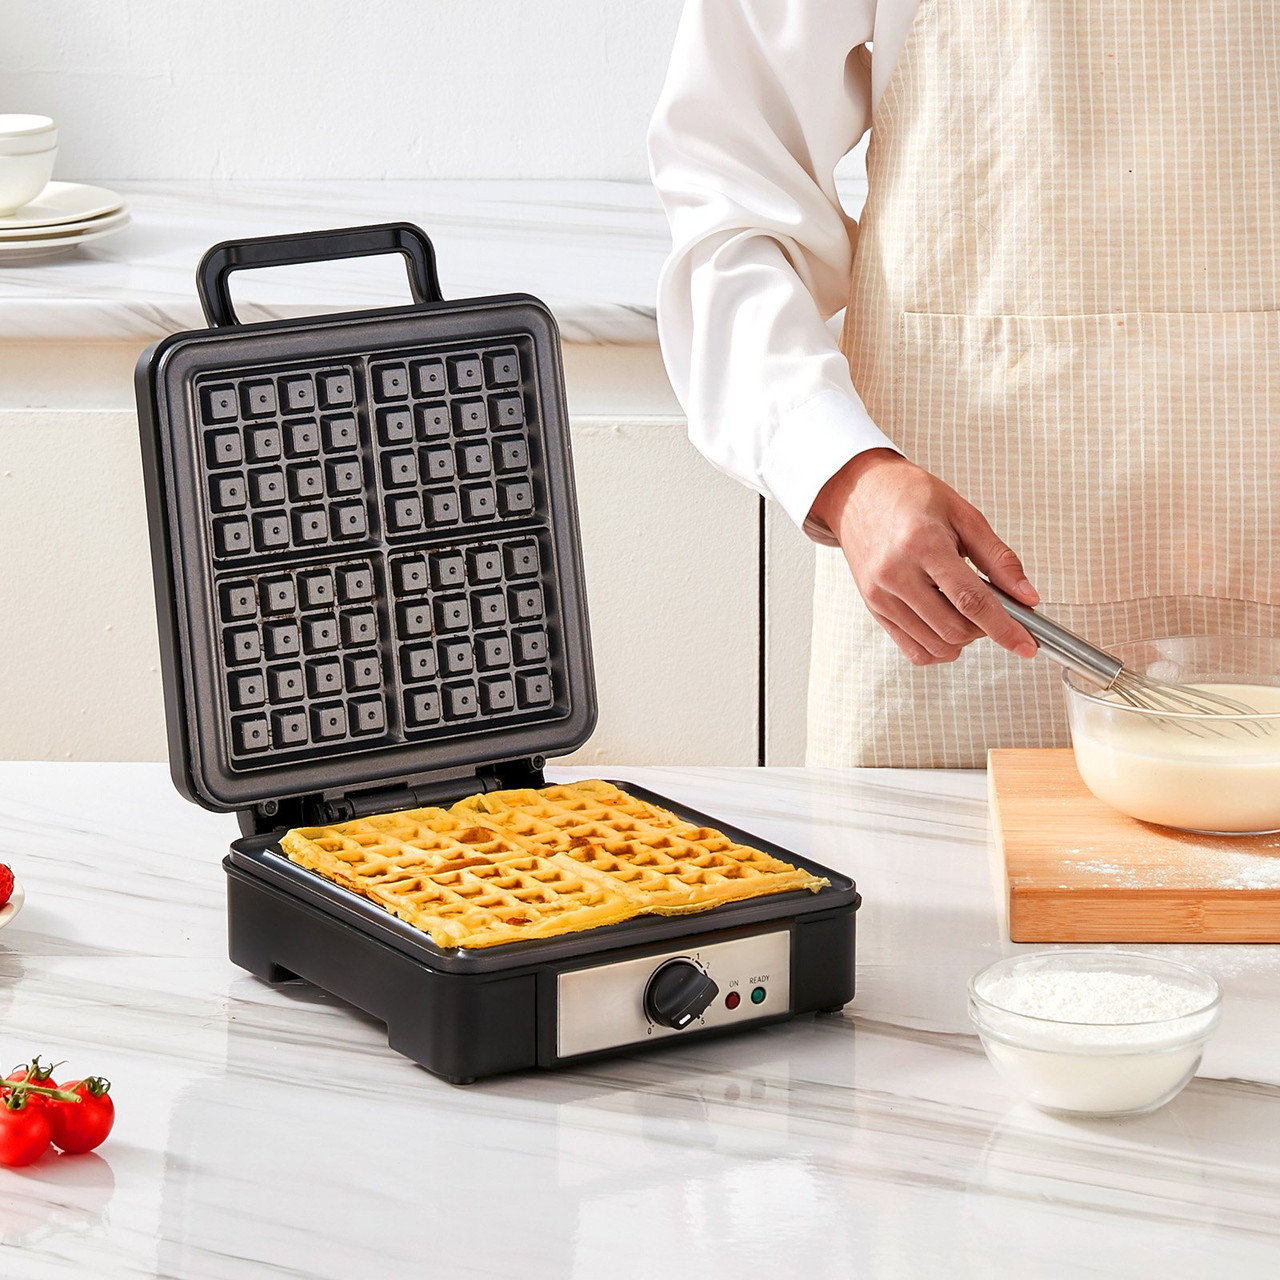 Waffle Maker, 4 Slices per Batch, 1200W Square Waffle Iron, Non-Stick Waffle Baker Machine with 122-572? / 50-300? Temperature Range Teflon-Coated Baking Pans Stainless Steel Body, 120V